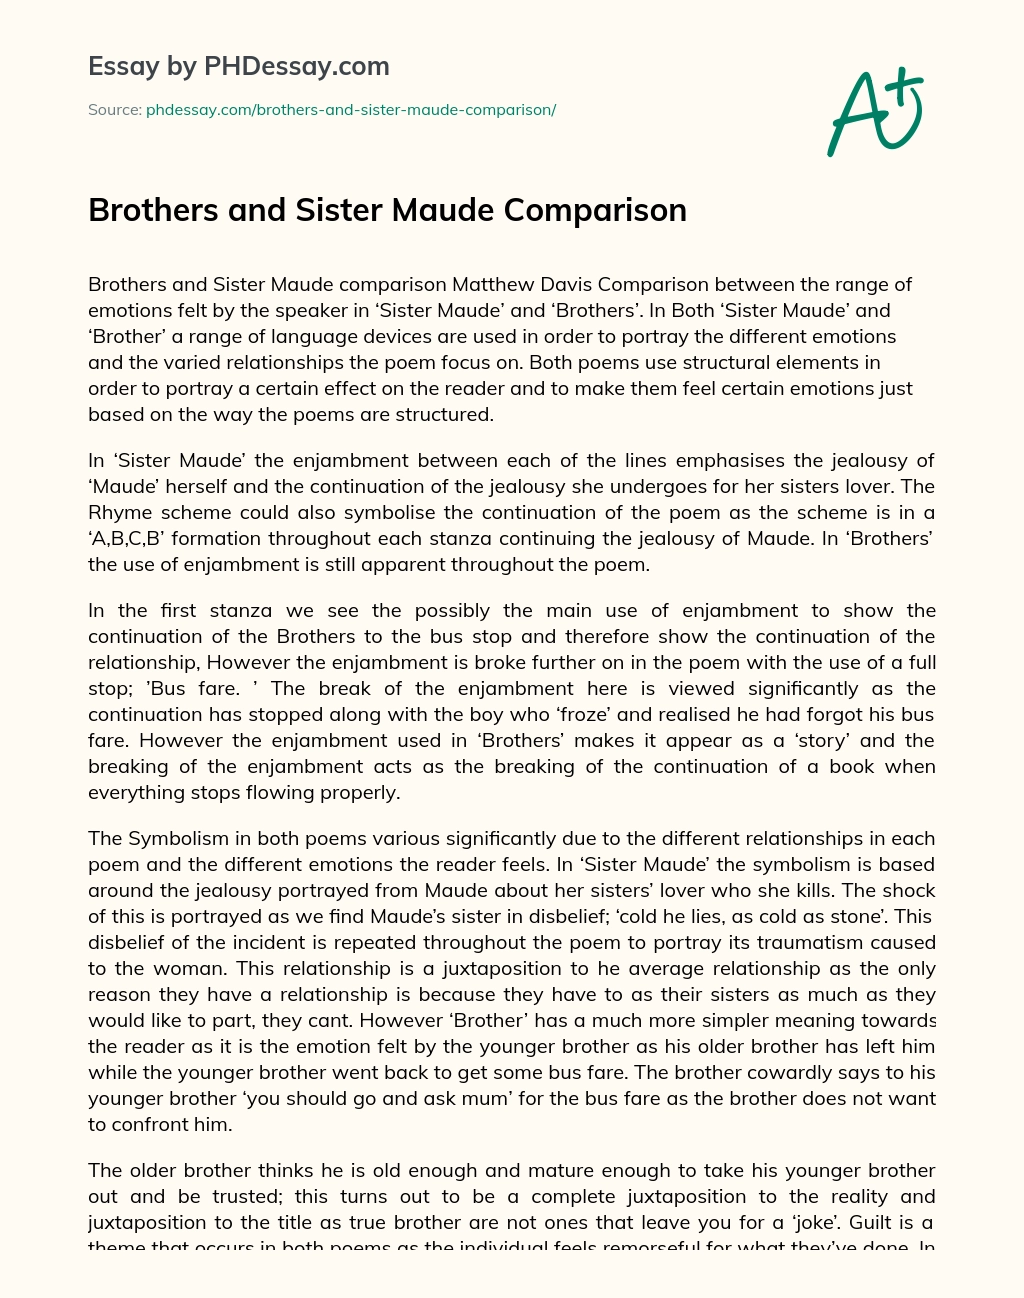 Brothers and Sister Maude Comparison essay